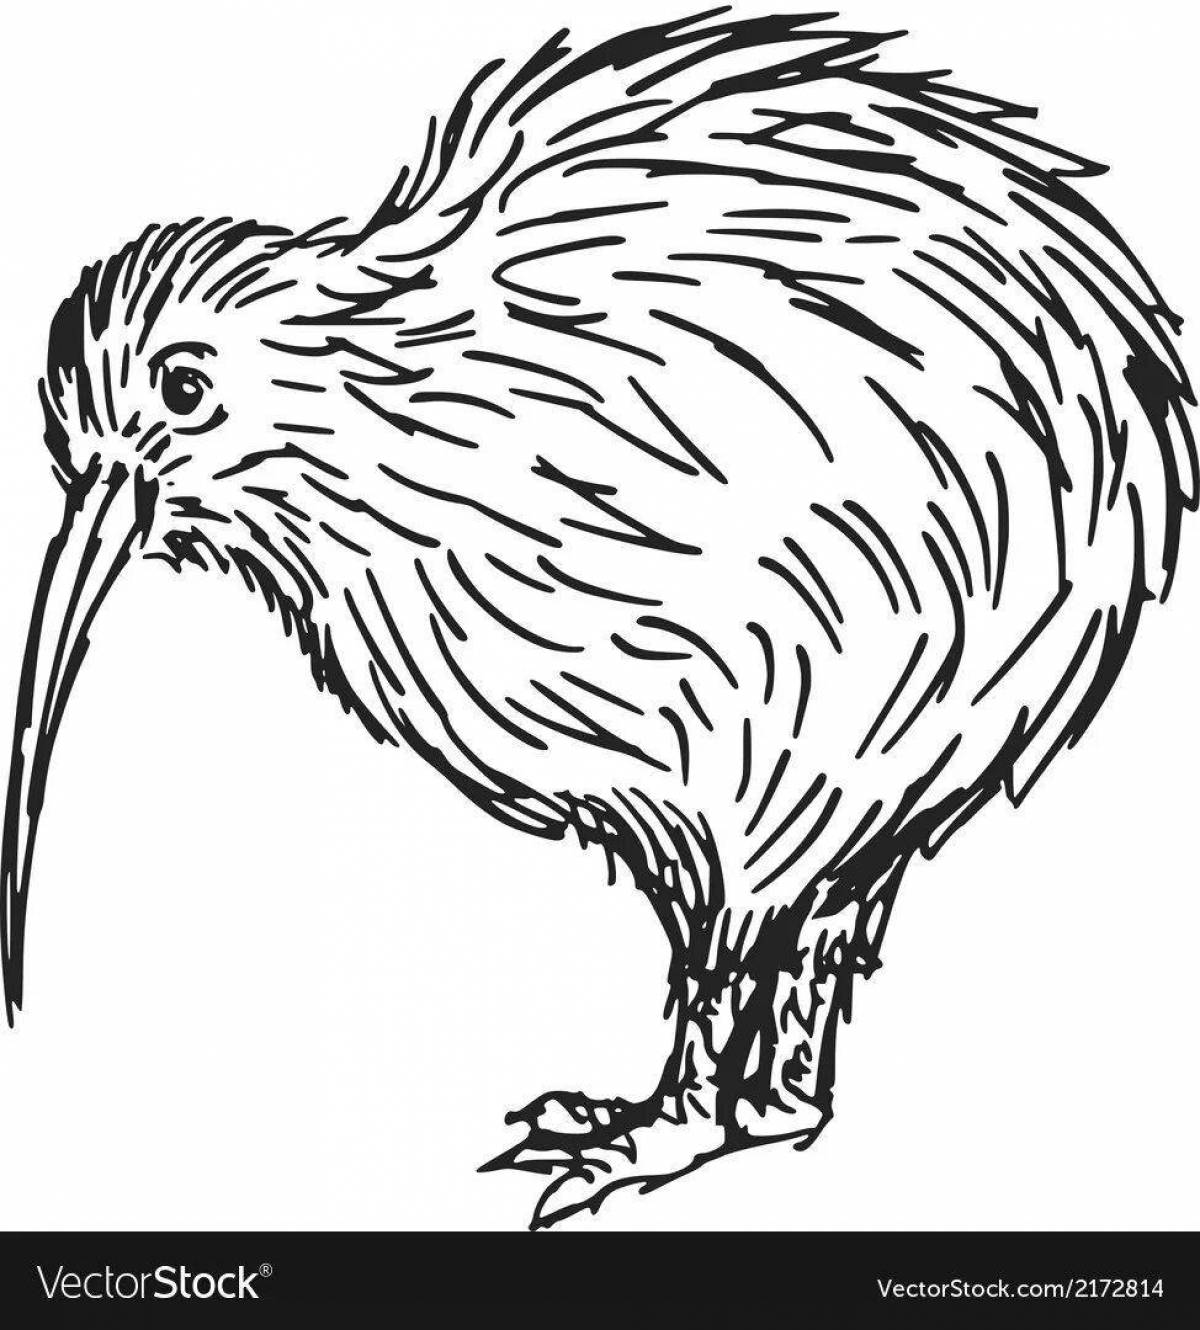 Kiwi bird coloring page with splashes of color